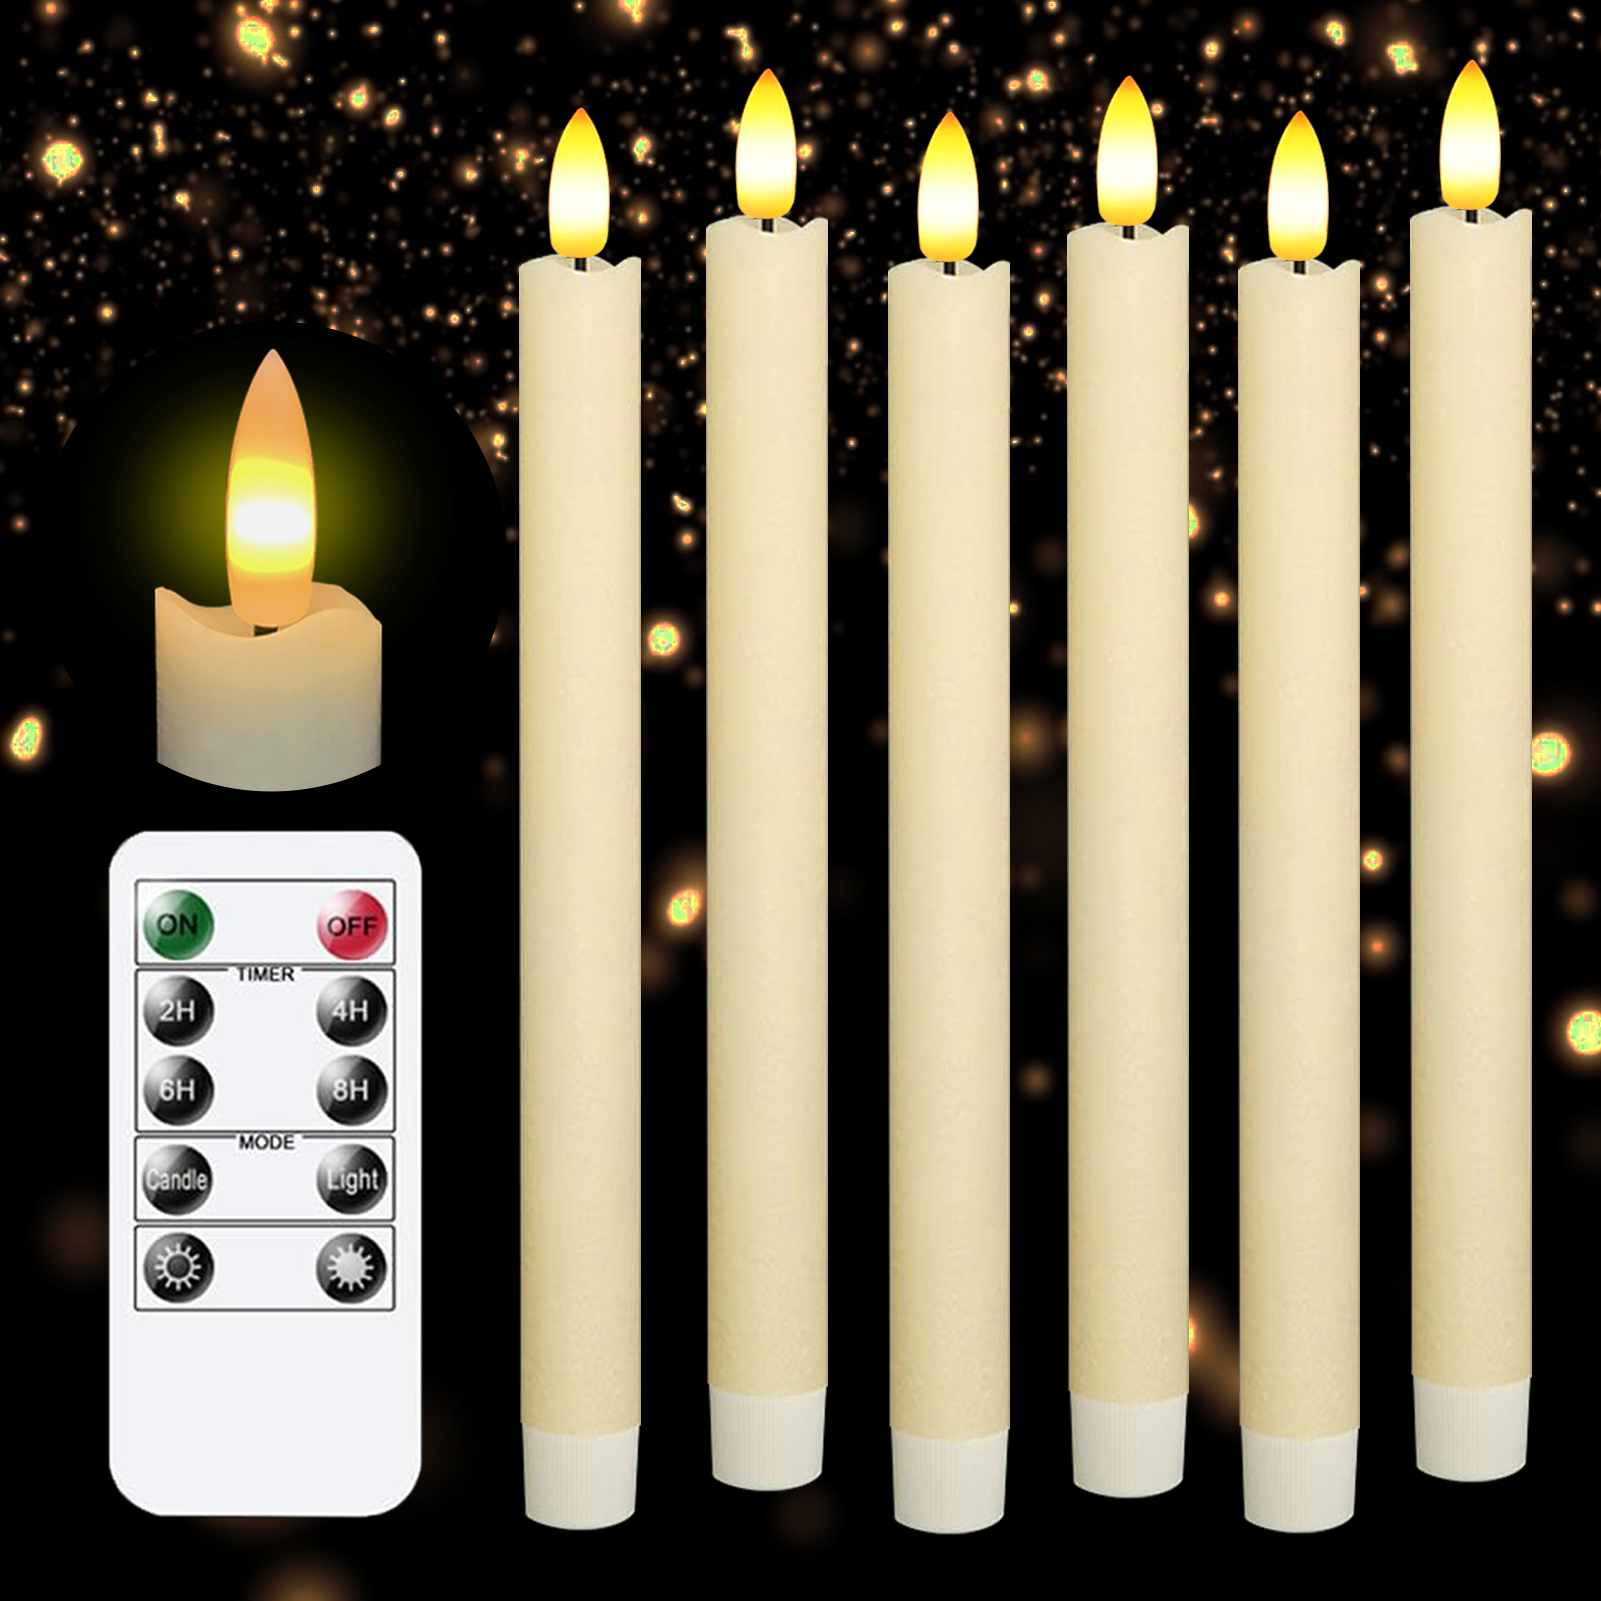 Nilecc Flameless lvory Taper Led Candles - 9.6" Battery Operated Candles, Real Wax Flameless Candles with Remote and Timer, 6 Pcs LED Candles Candlesticks for Home, Wedding, Party Decor…